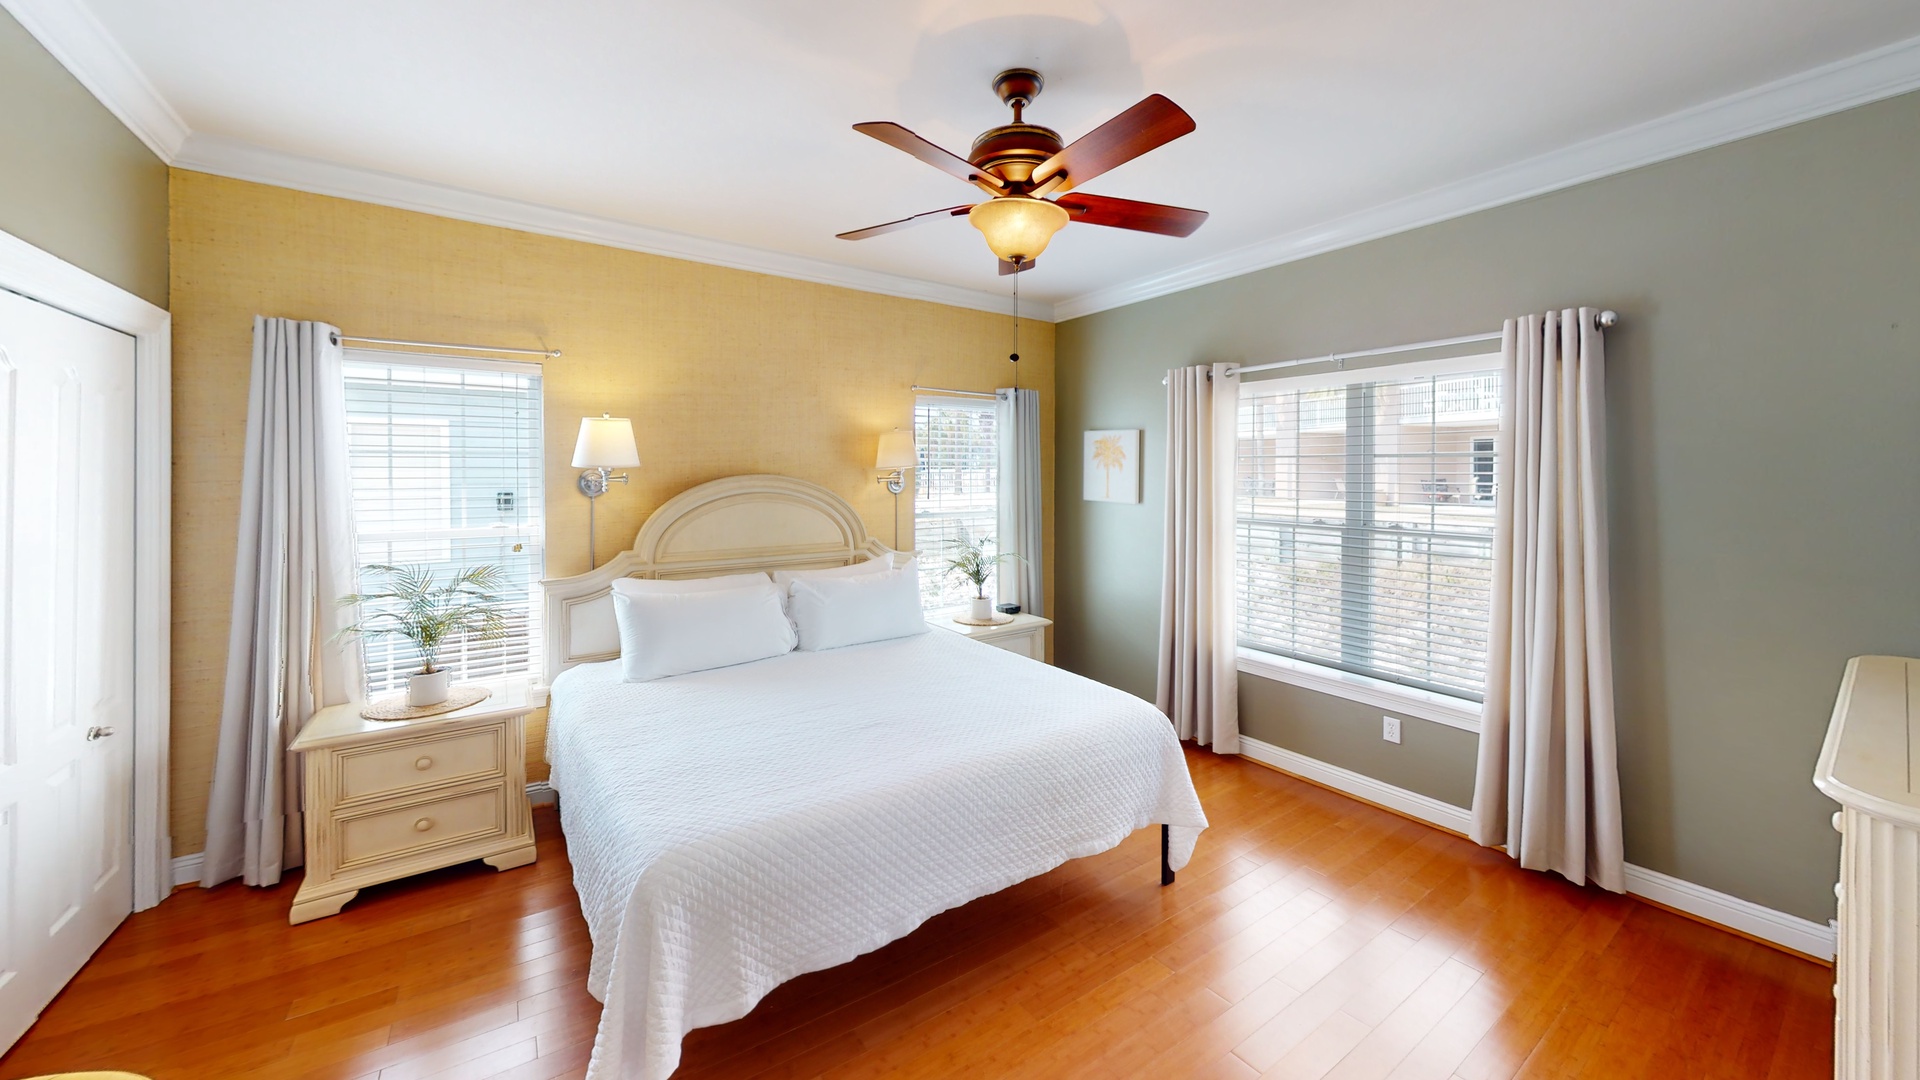 The Master bedroom features a king bed and a ceiling fan